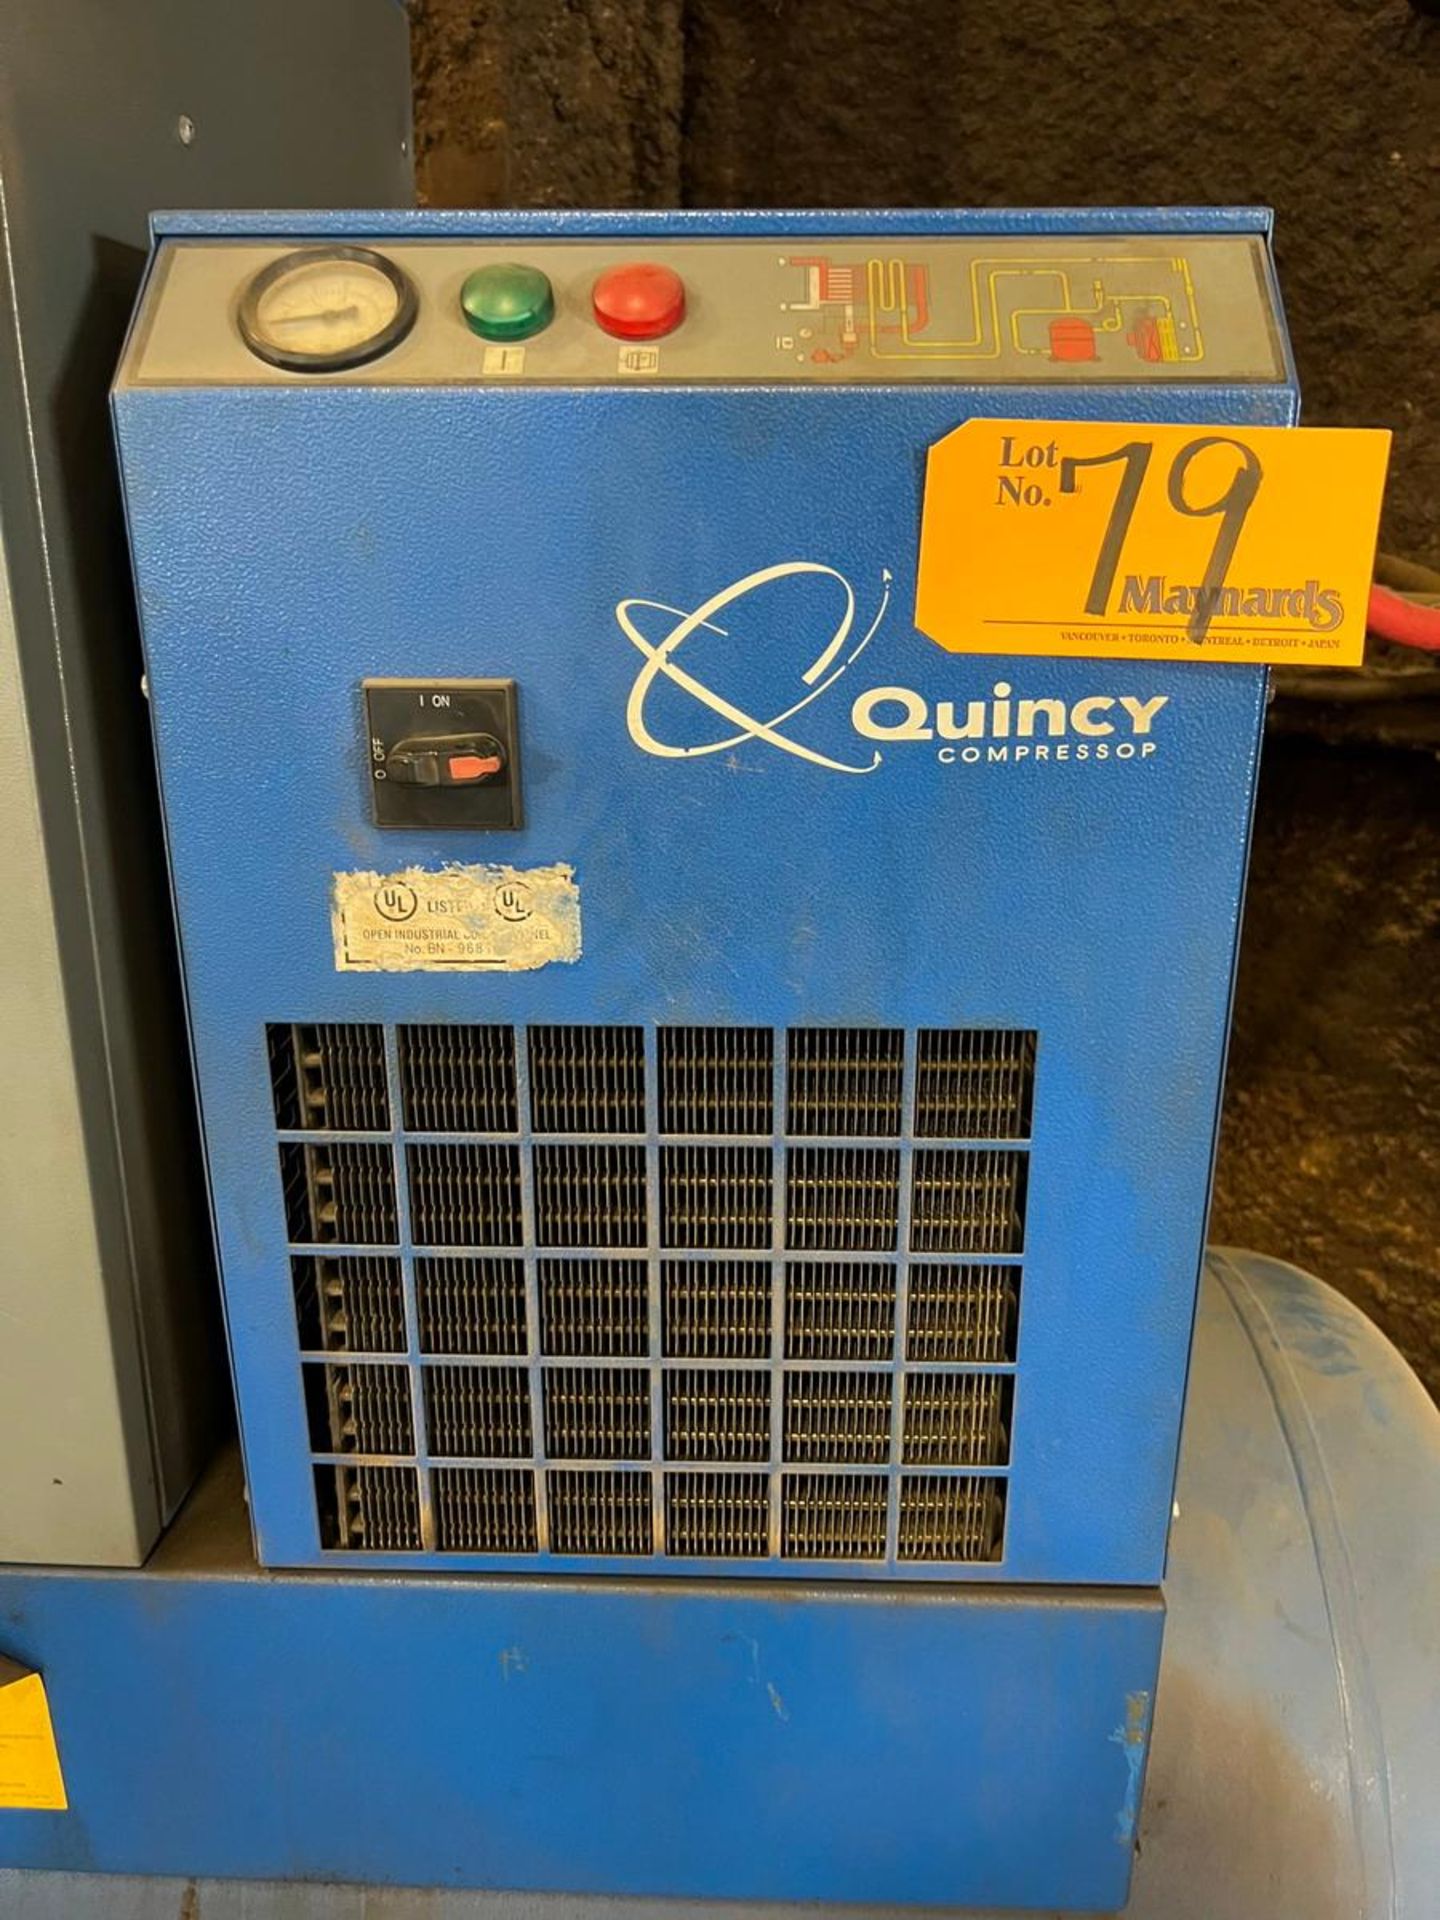 2007 Quincy 15 Hp. Air compressor - Image 4 of 4